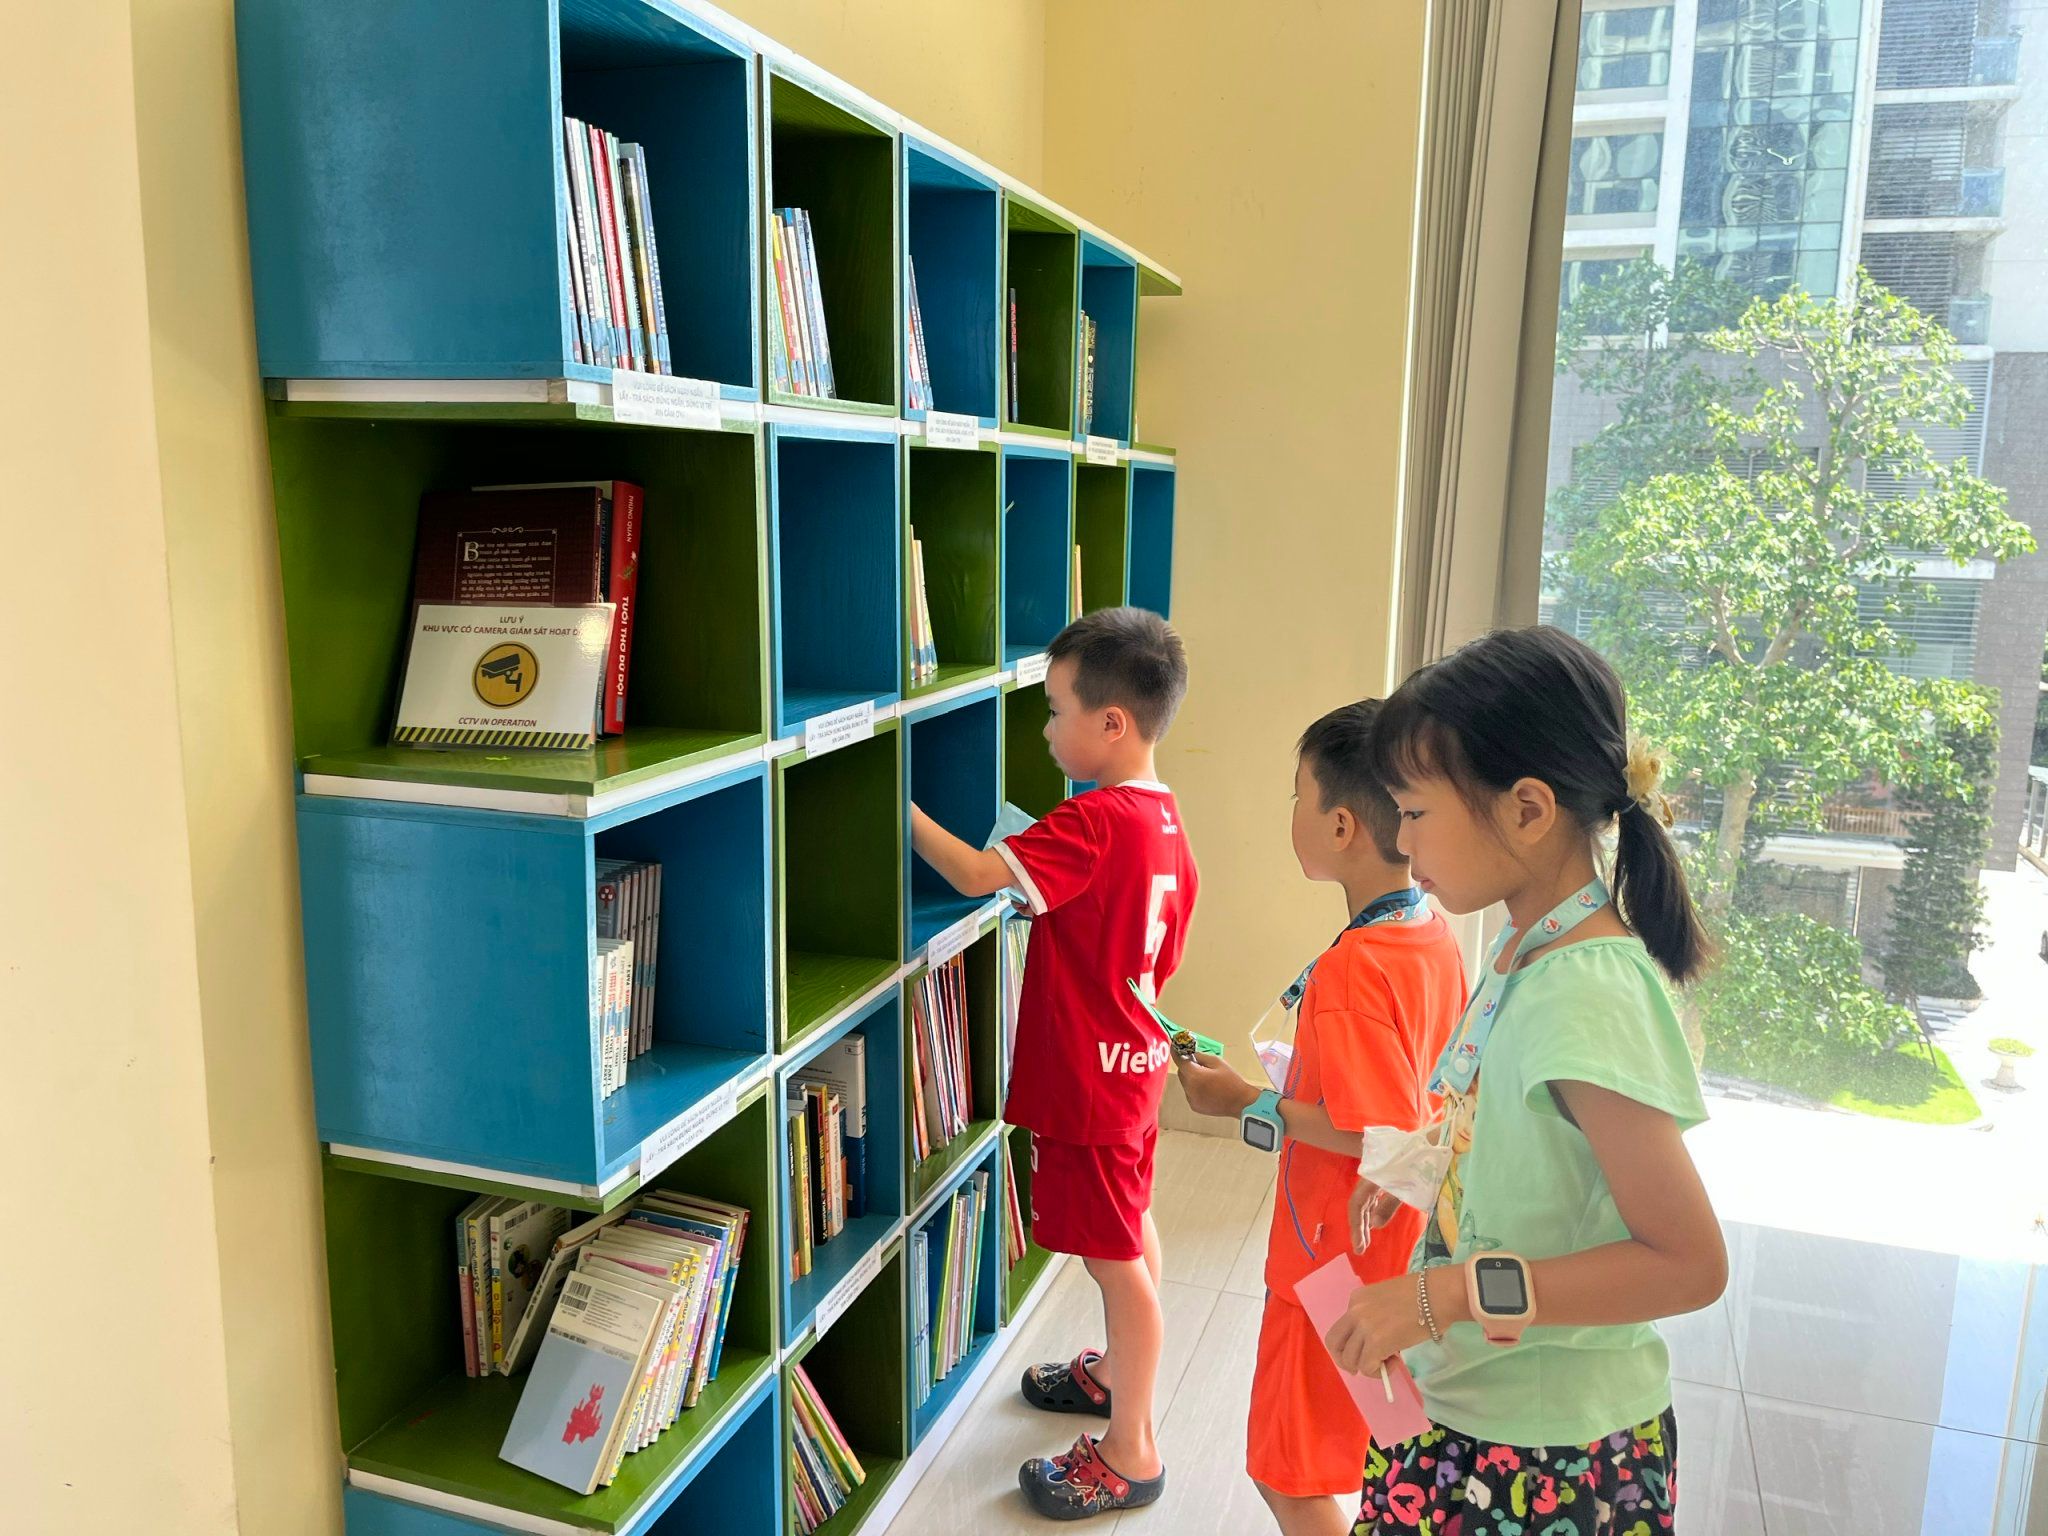 Residents enjoy visiting the library